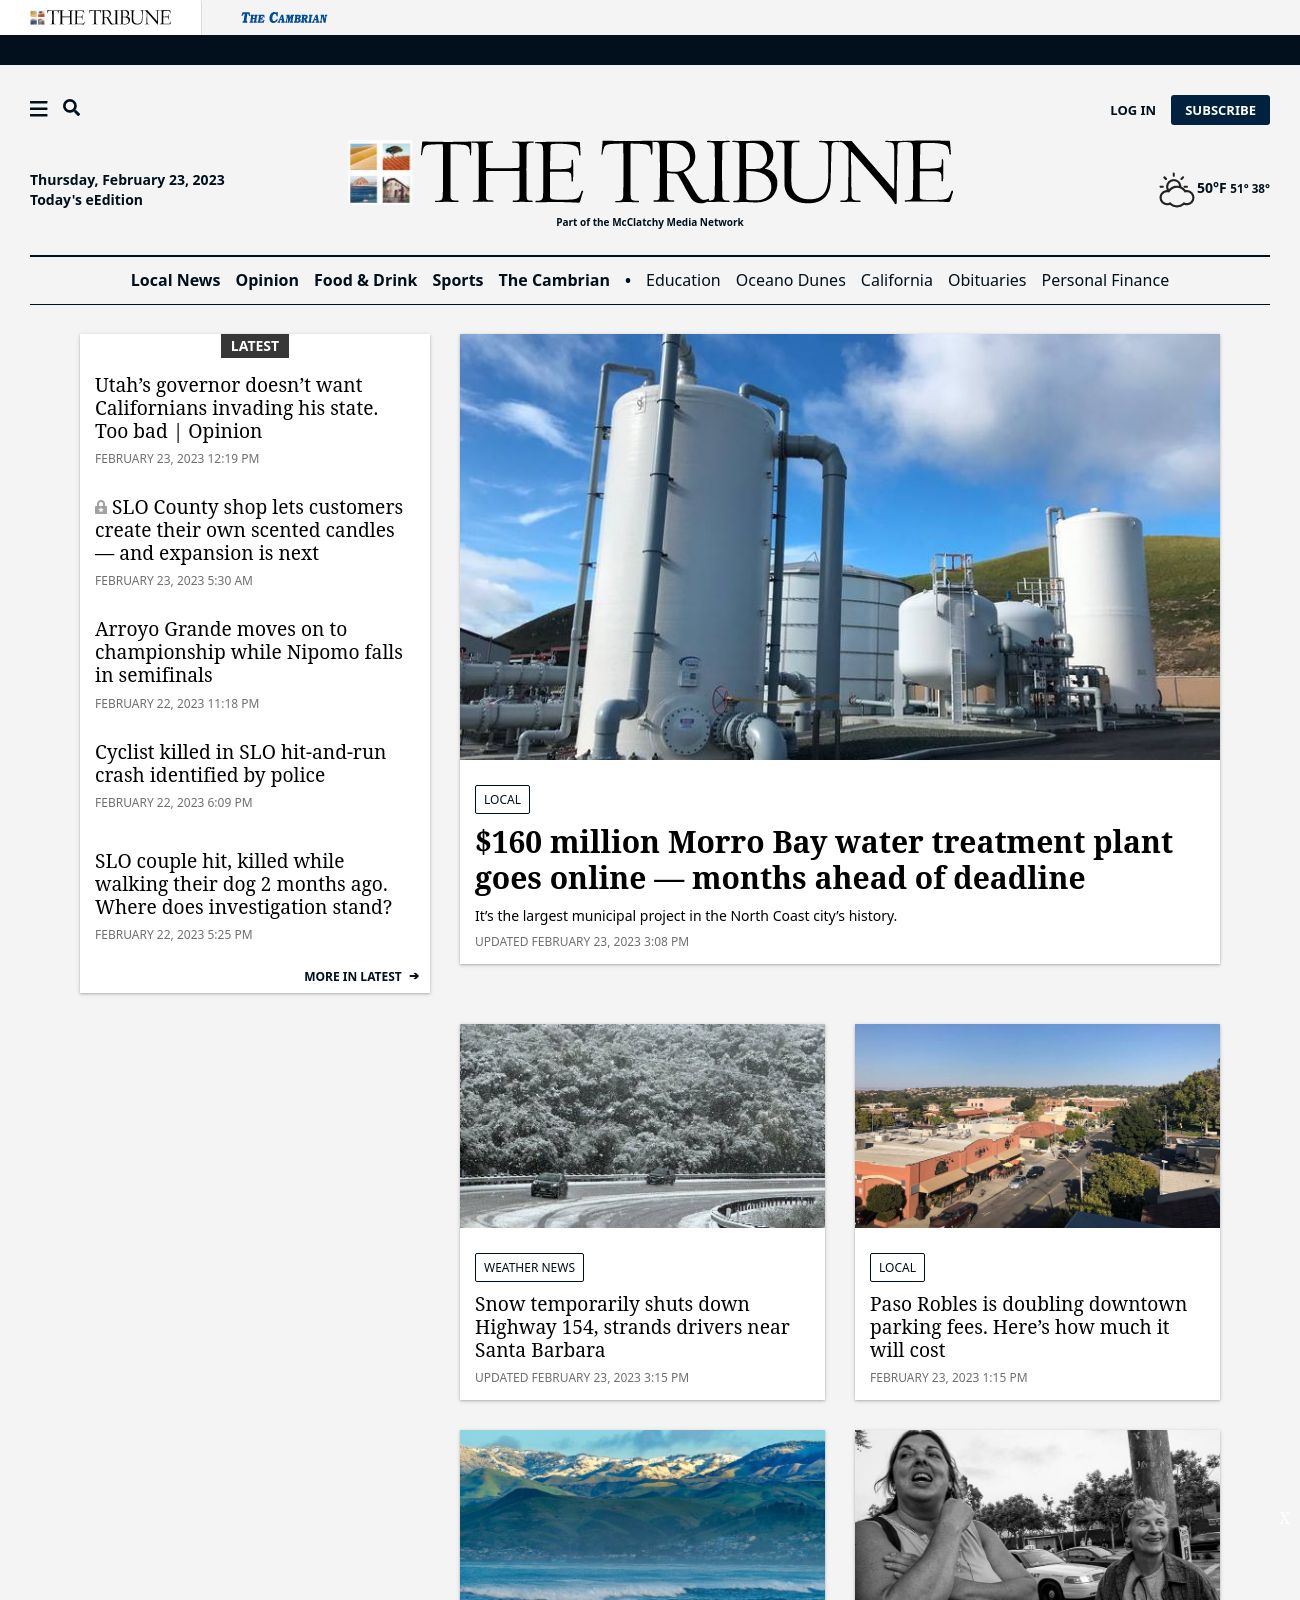 The Tribune at 2023-02-23 15:56:48-08:00 local time